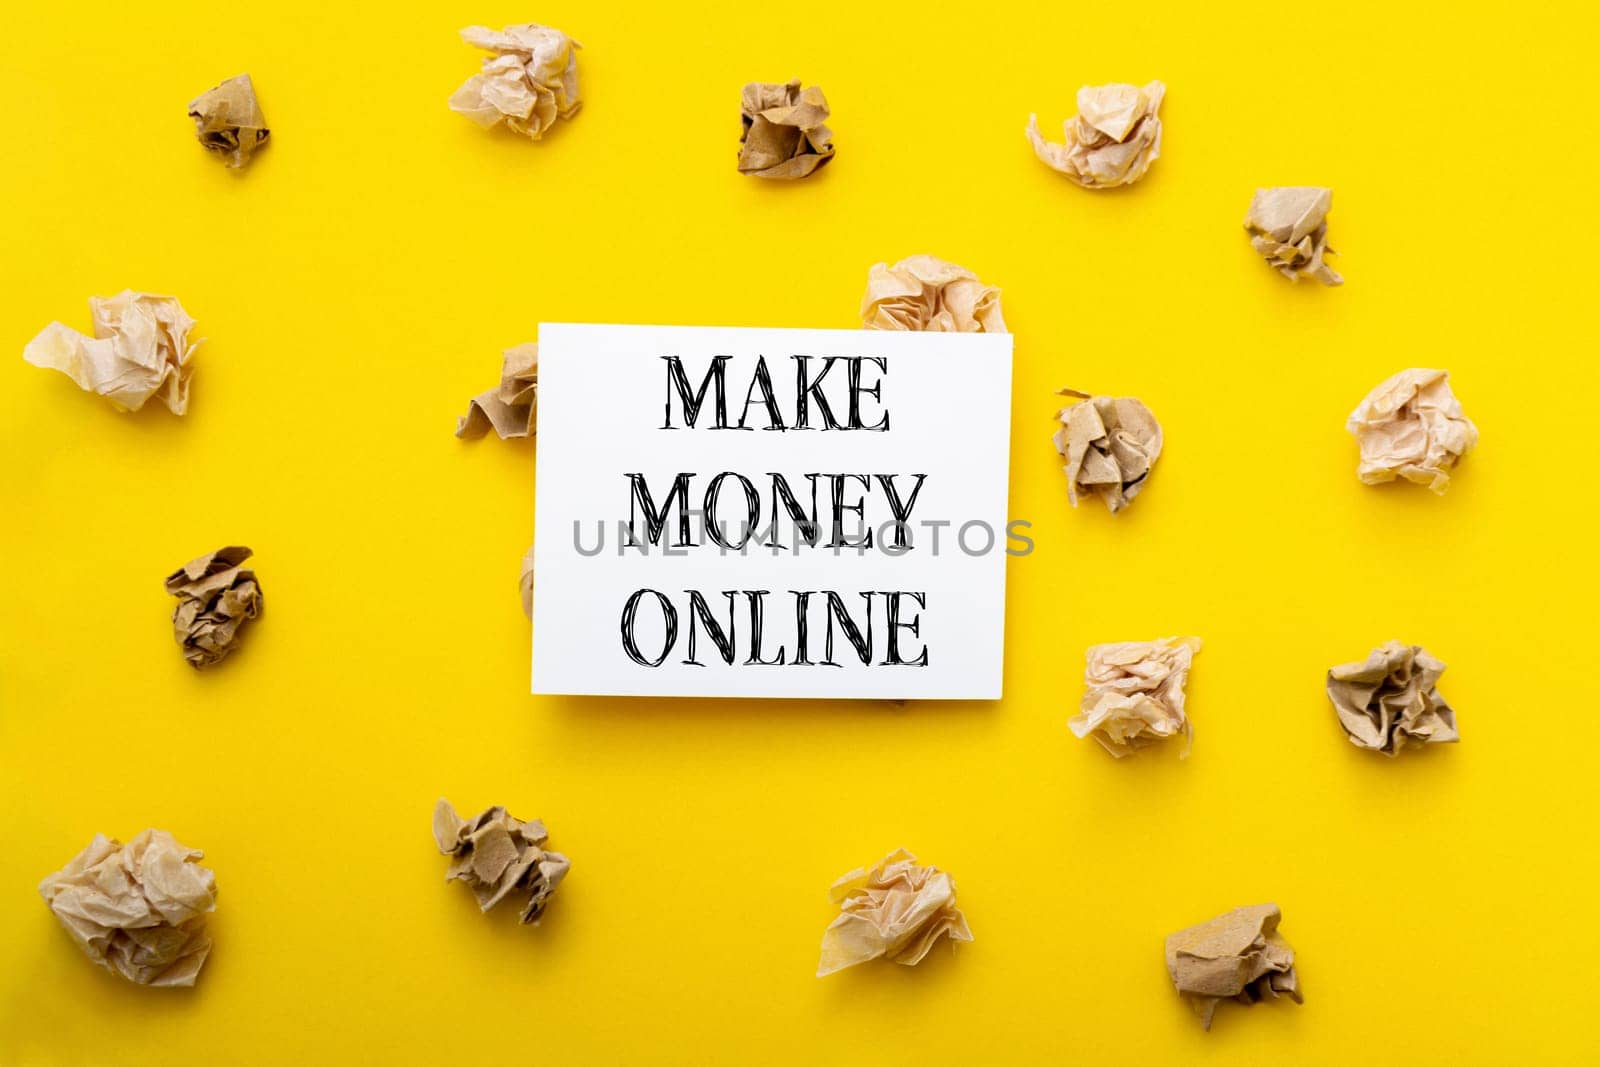 A white sign with the words Make Money Online written on it is placed on top of a yellow background. The sign is surrounded by crumpled paper, giving the impression of a cluttered